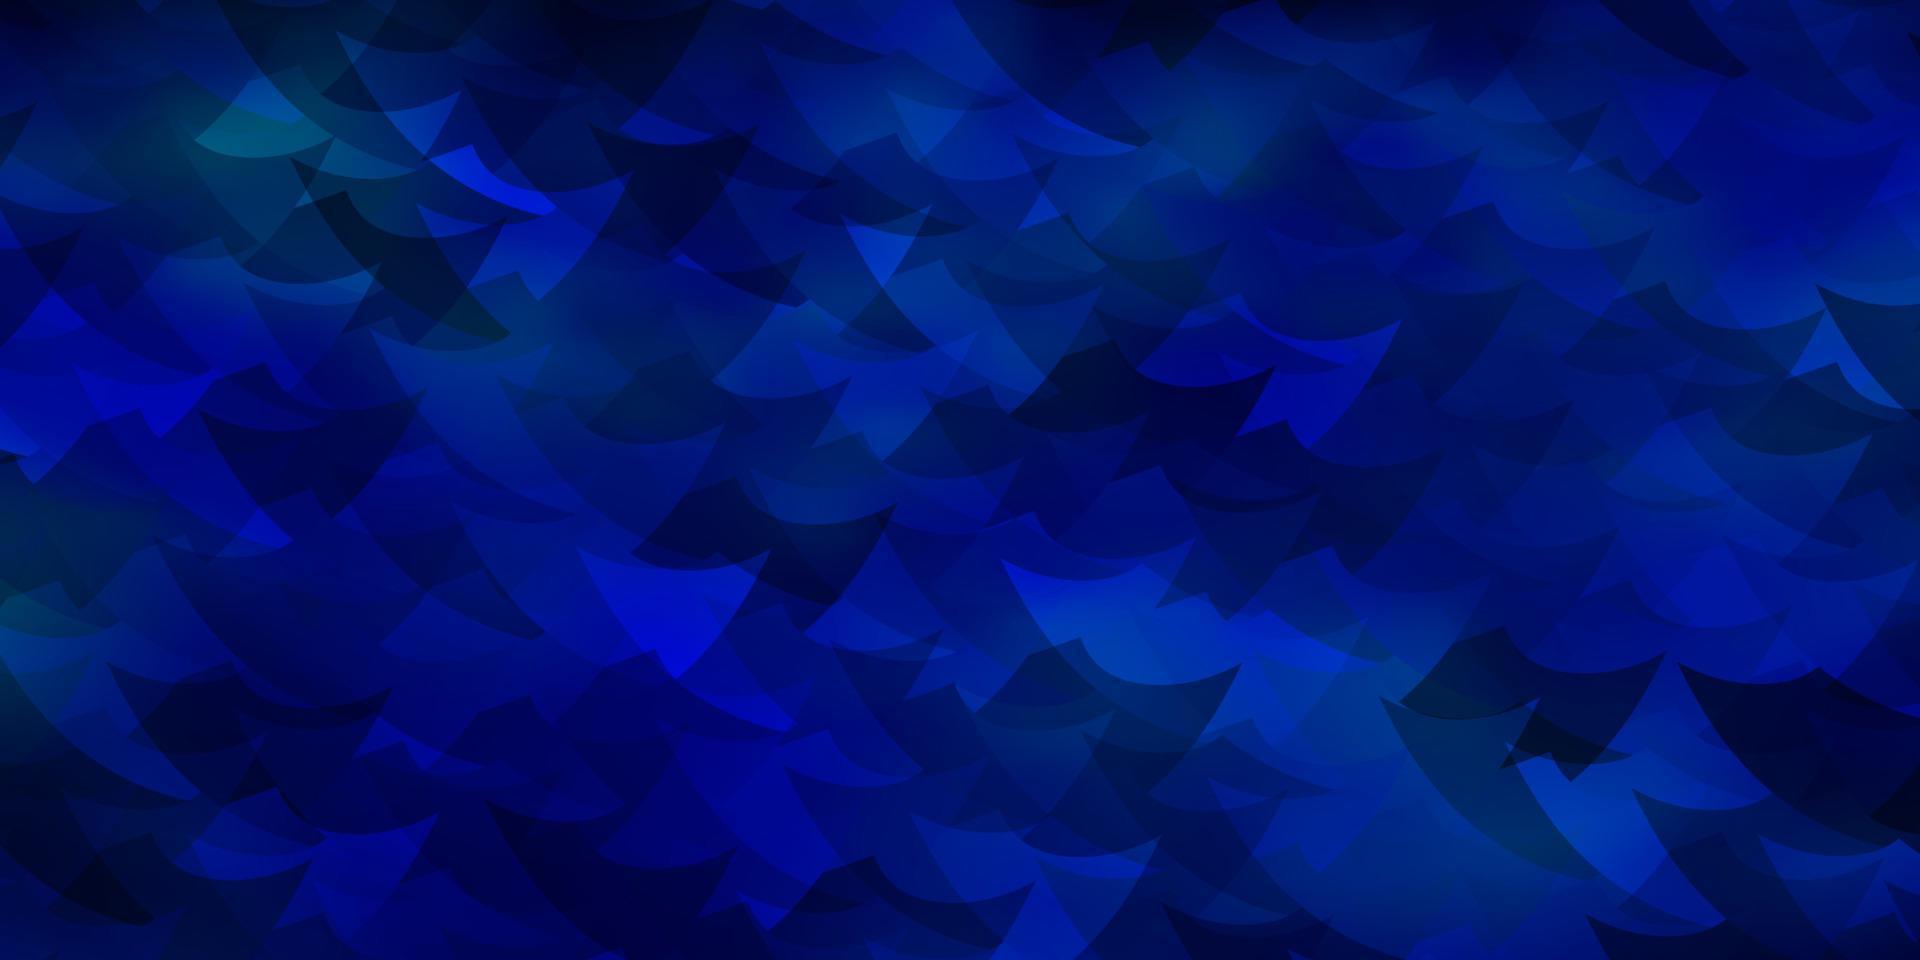 Dark Blue, Green vector texture with poly style with cubes.